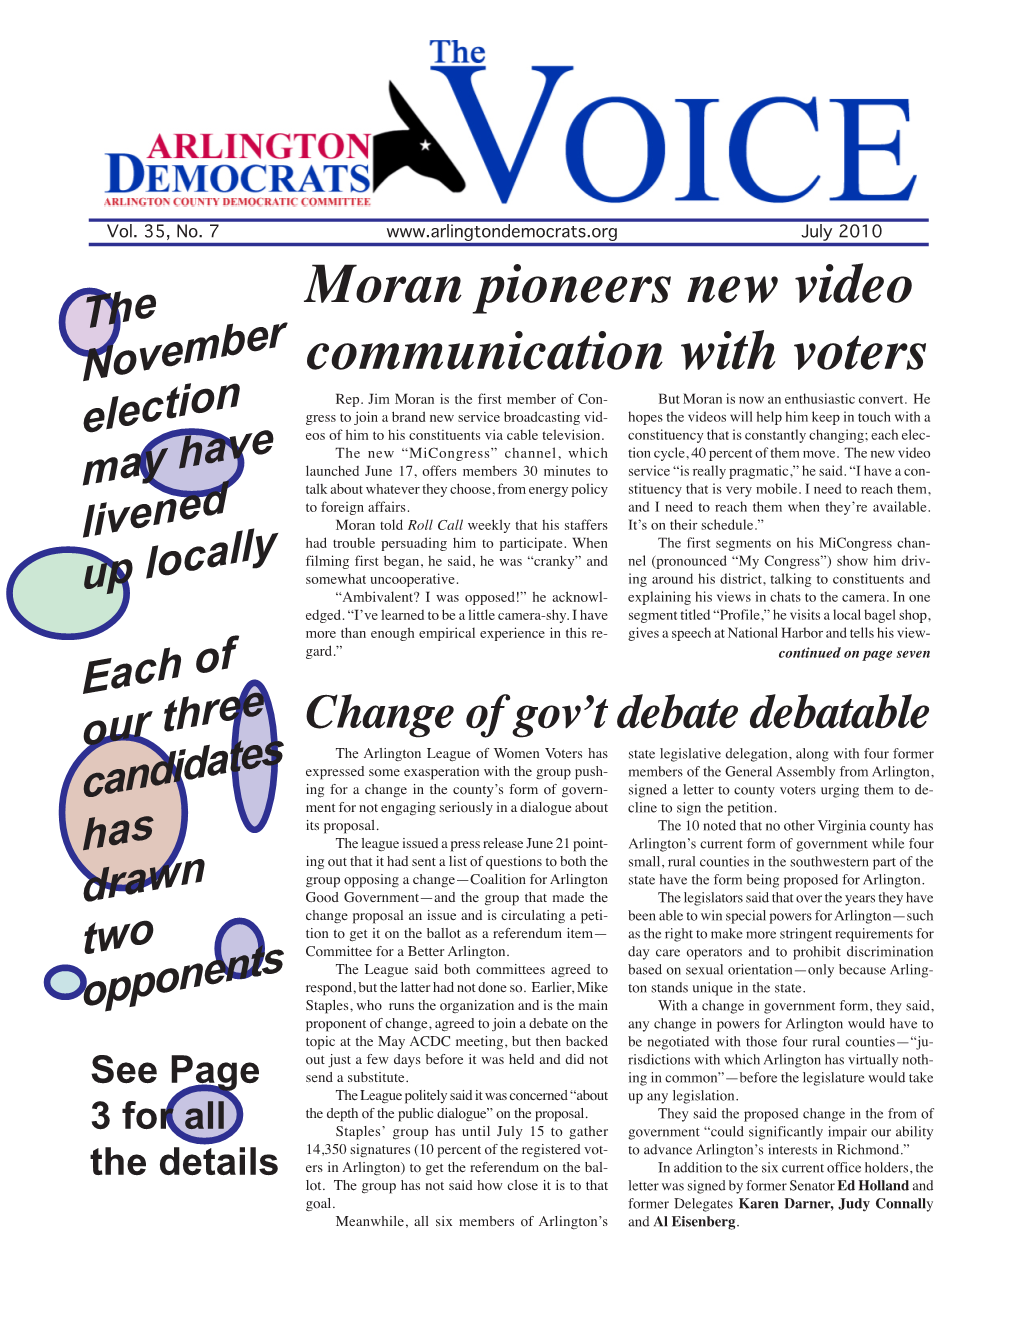 Moran Pioneers New Video Communication with Voters